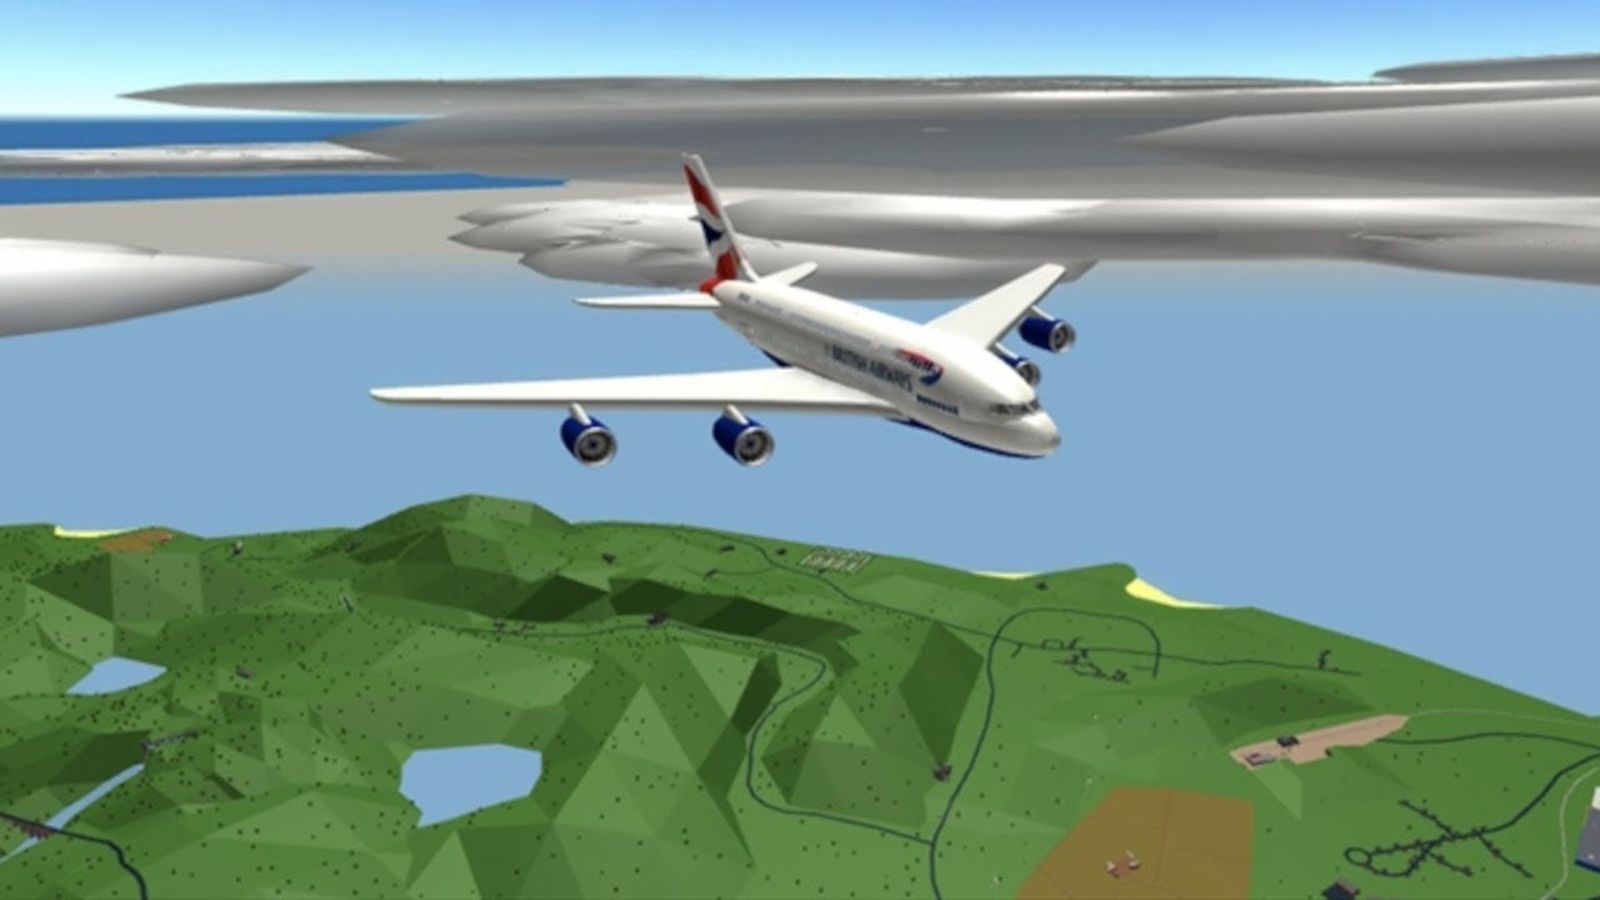 Airplane simulator codes - plane flying over green earth